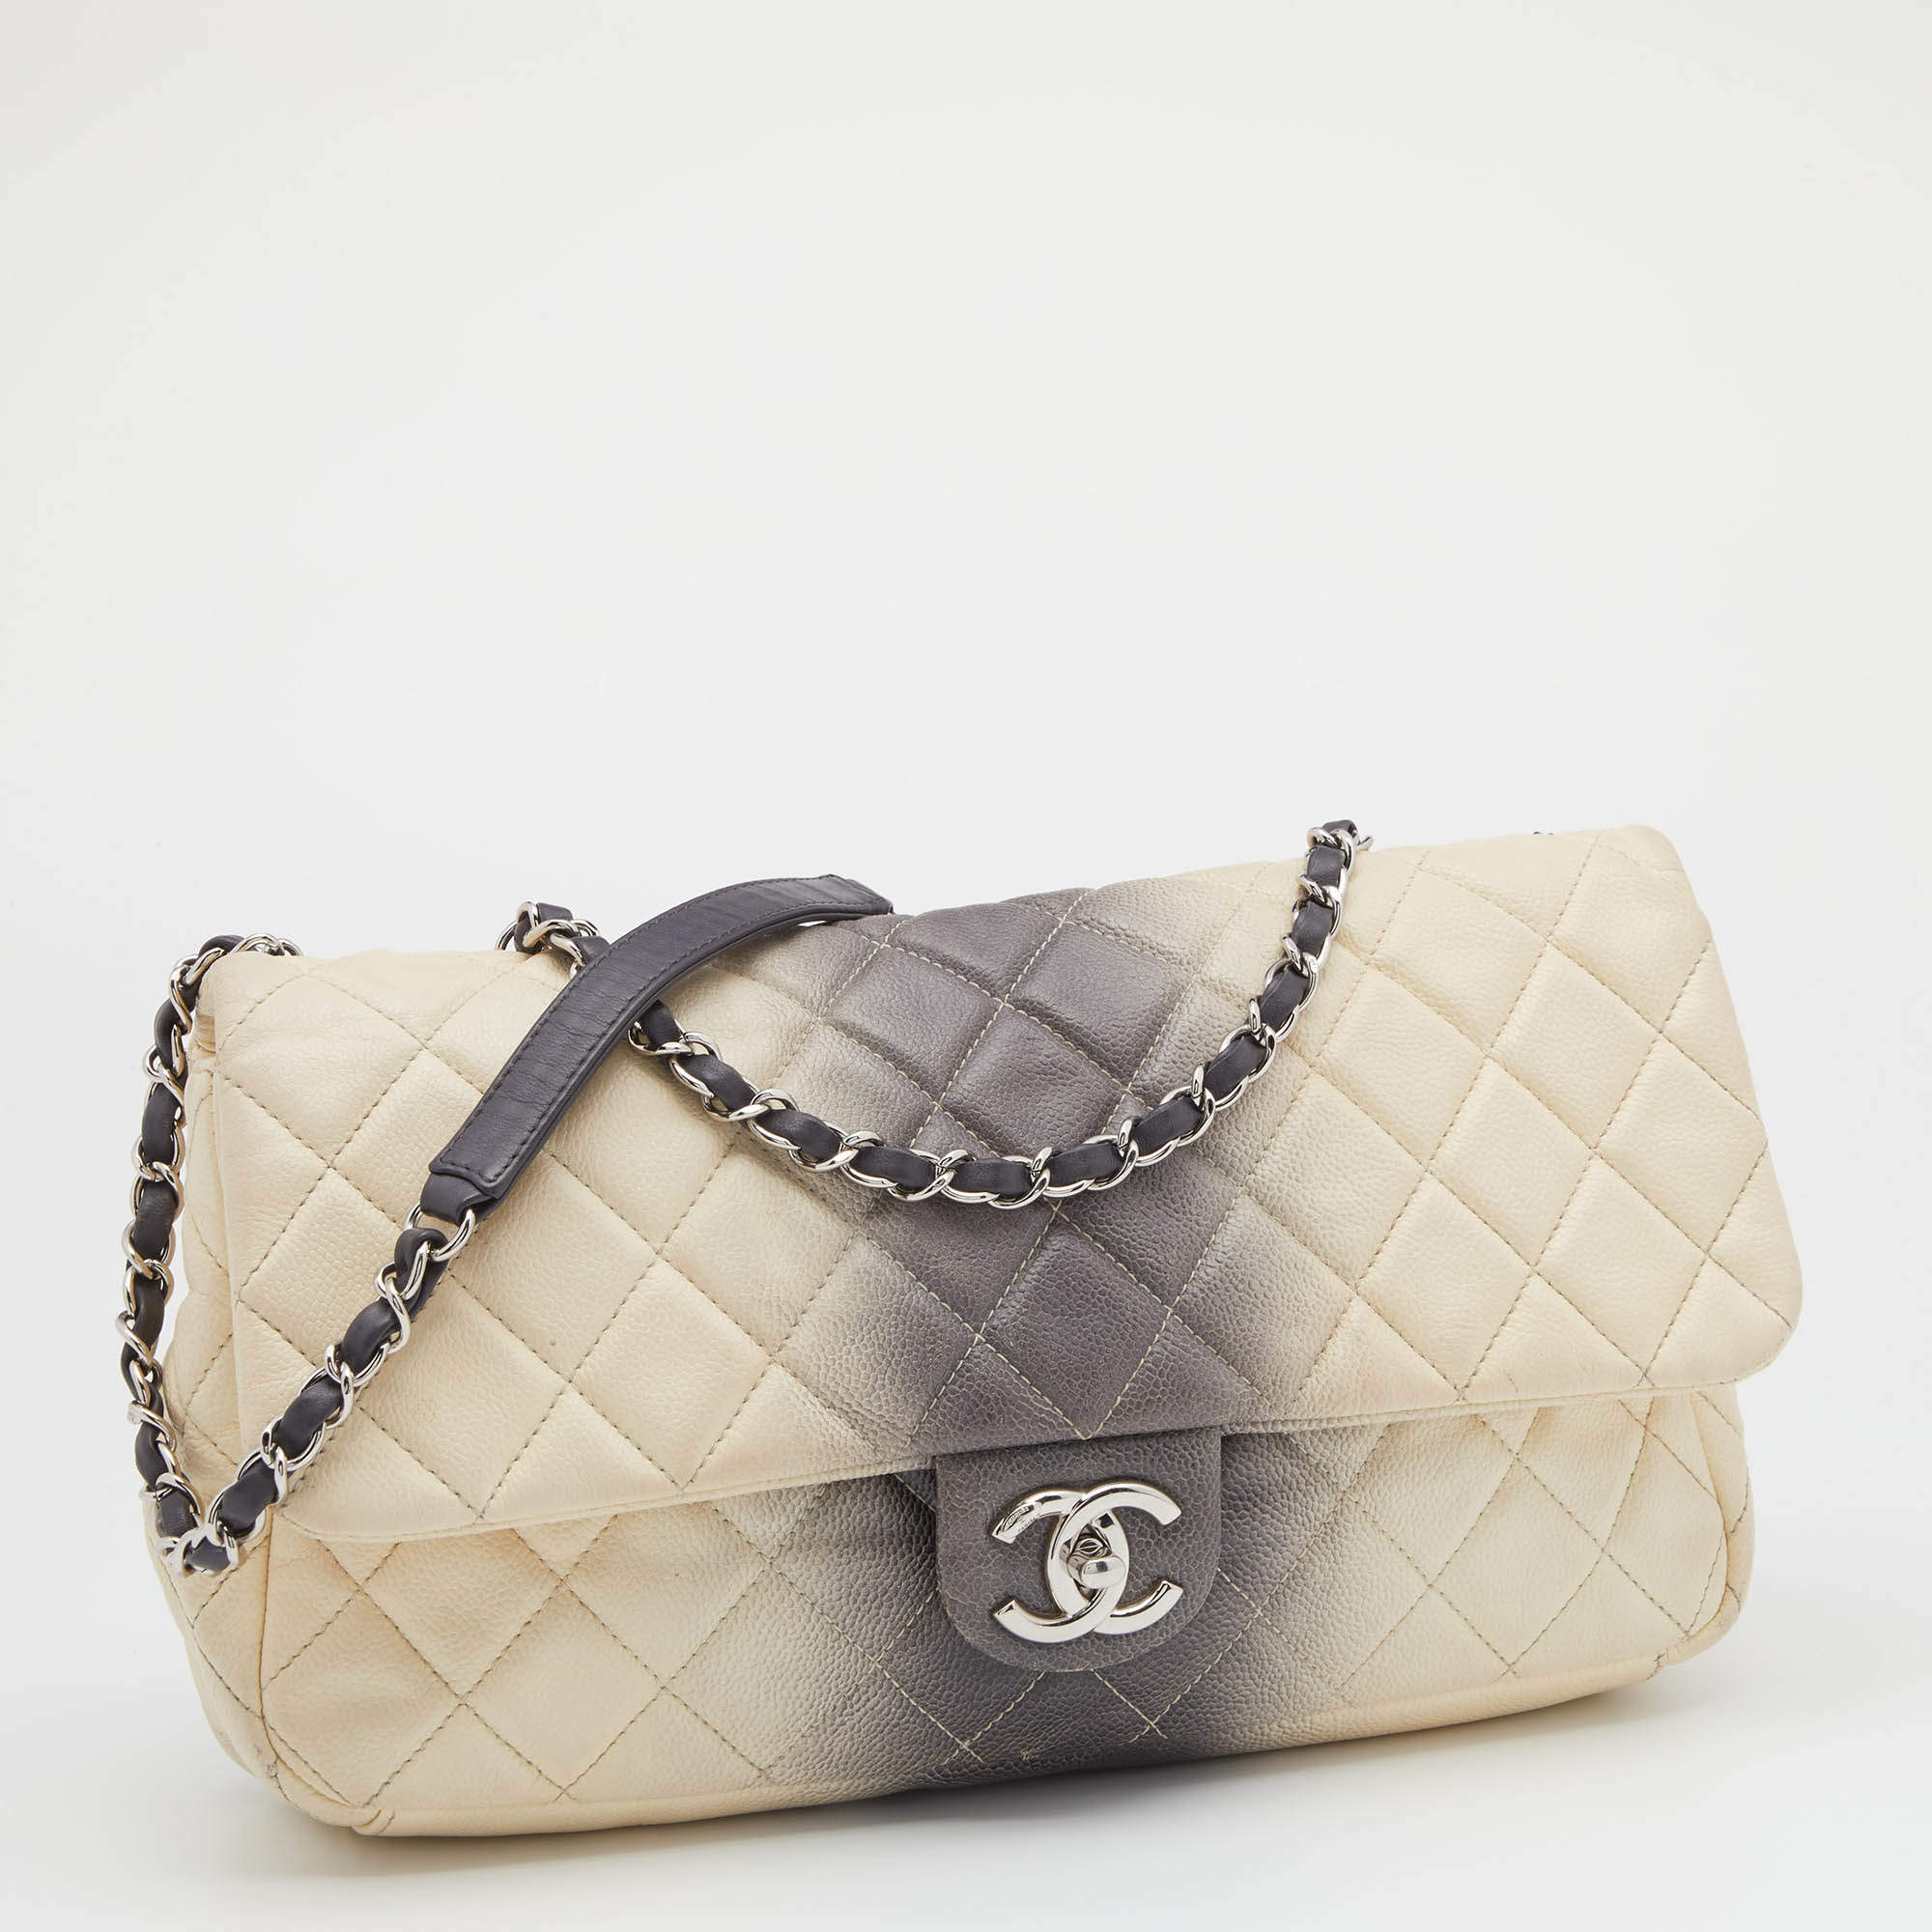 Chanel Cream/Grey Ombre Quilted Caviar Leather Jumbo Classic Single Flap Bag